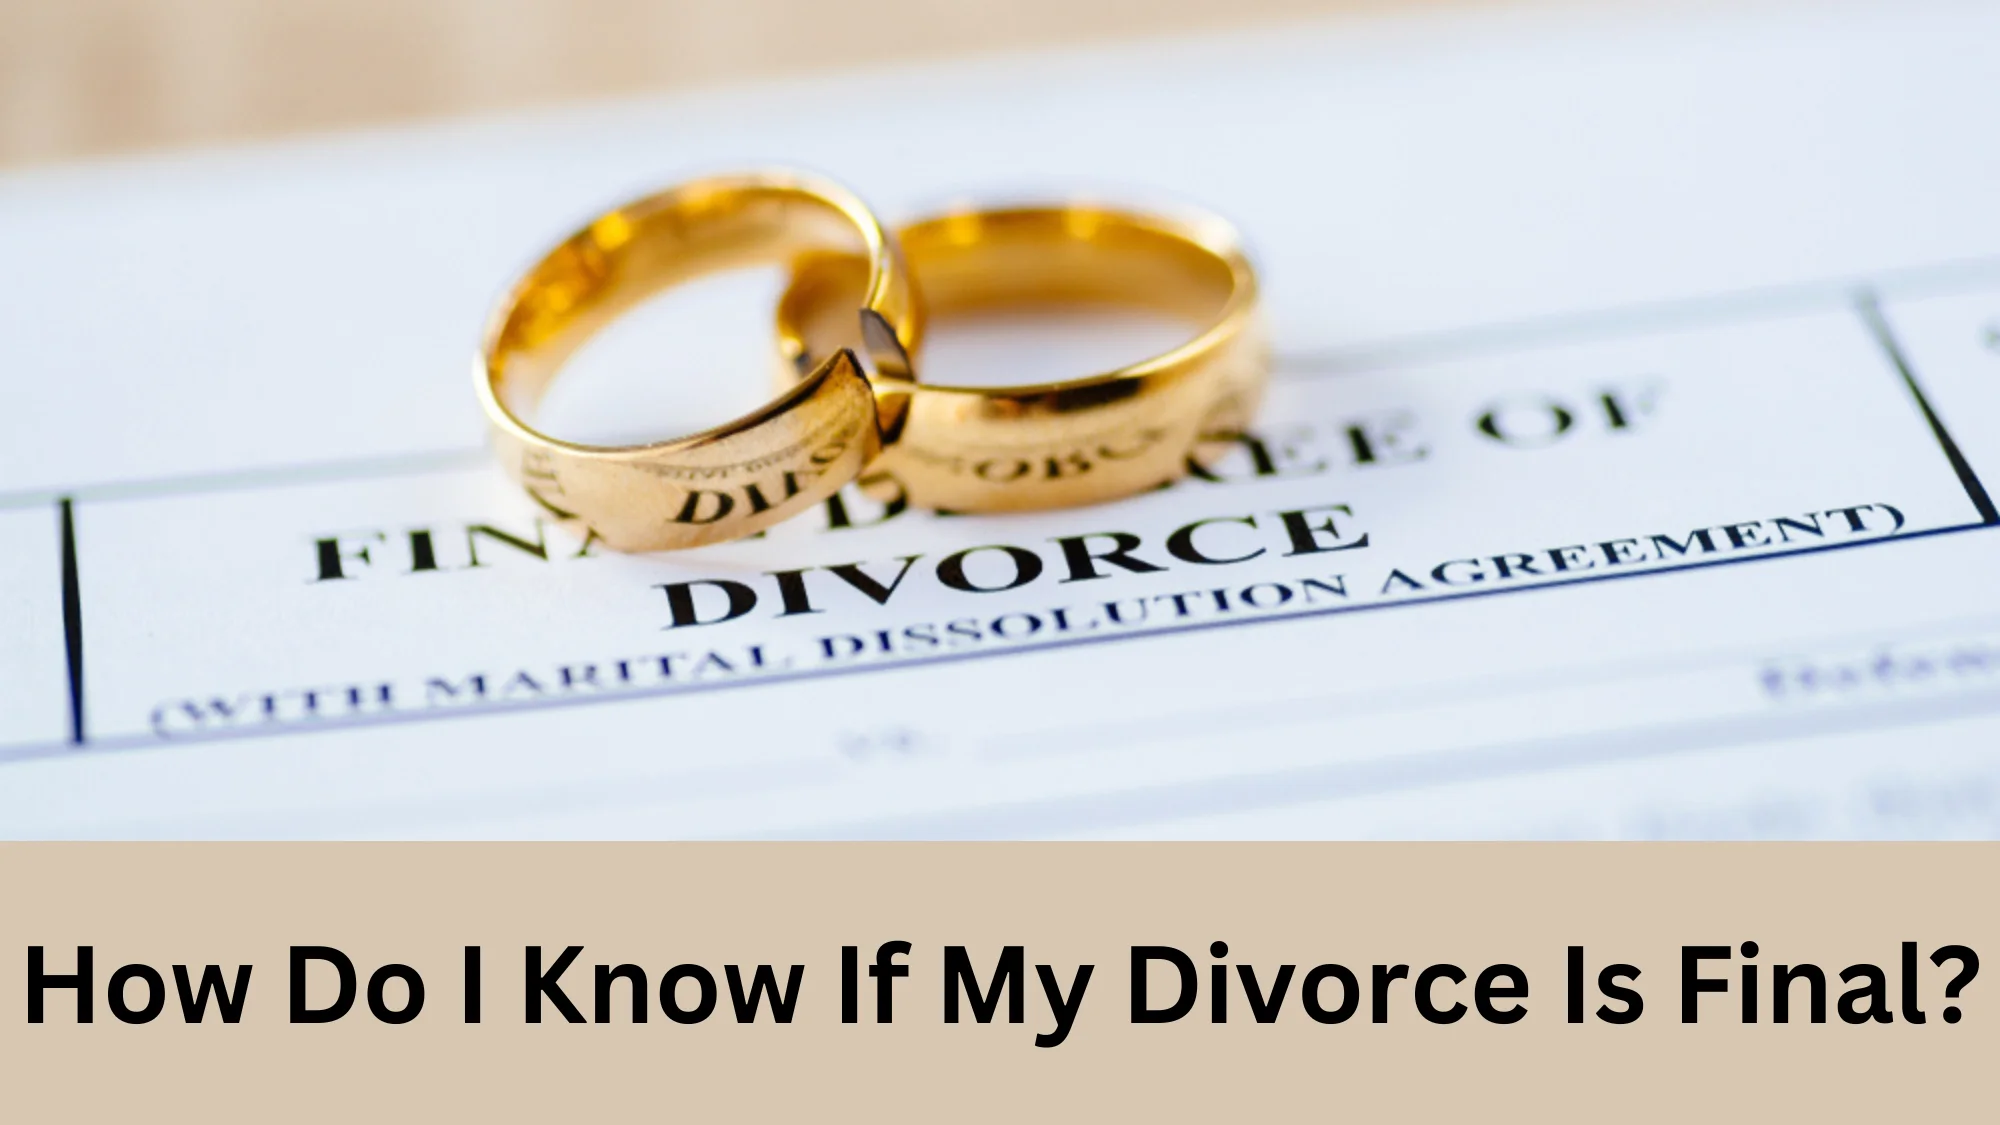 How Do I Know If My Divorce Is Final